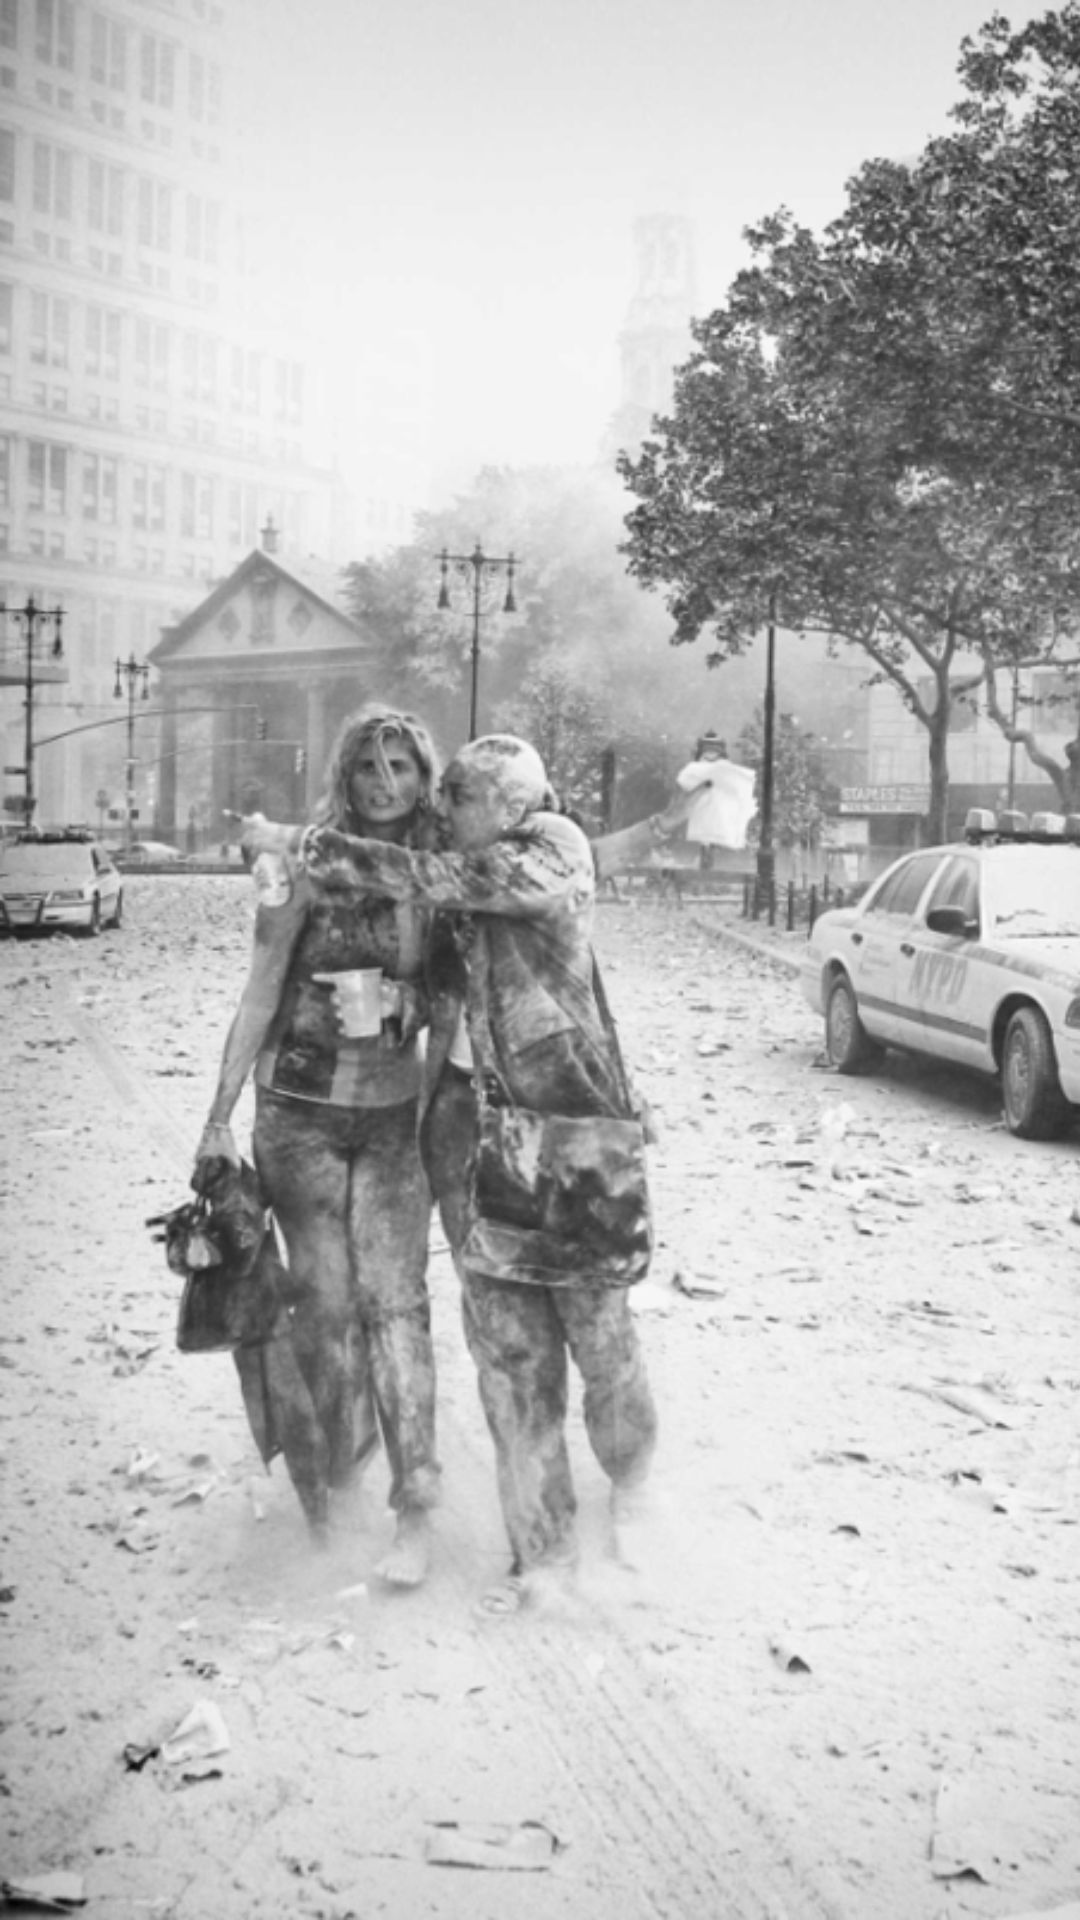 A pair of women in the foreground, covered in dust, as additional unsettled dust fills the air and the street is covered in debris.